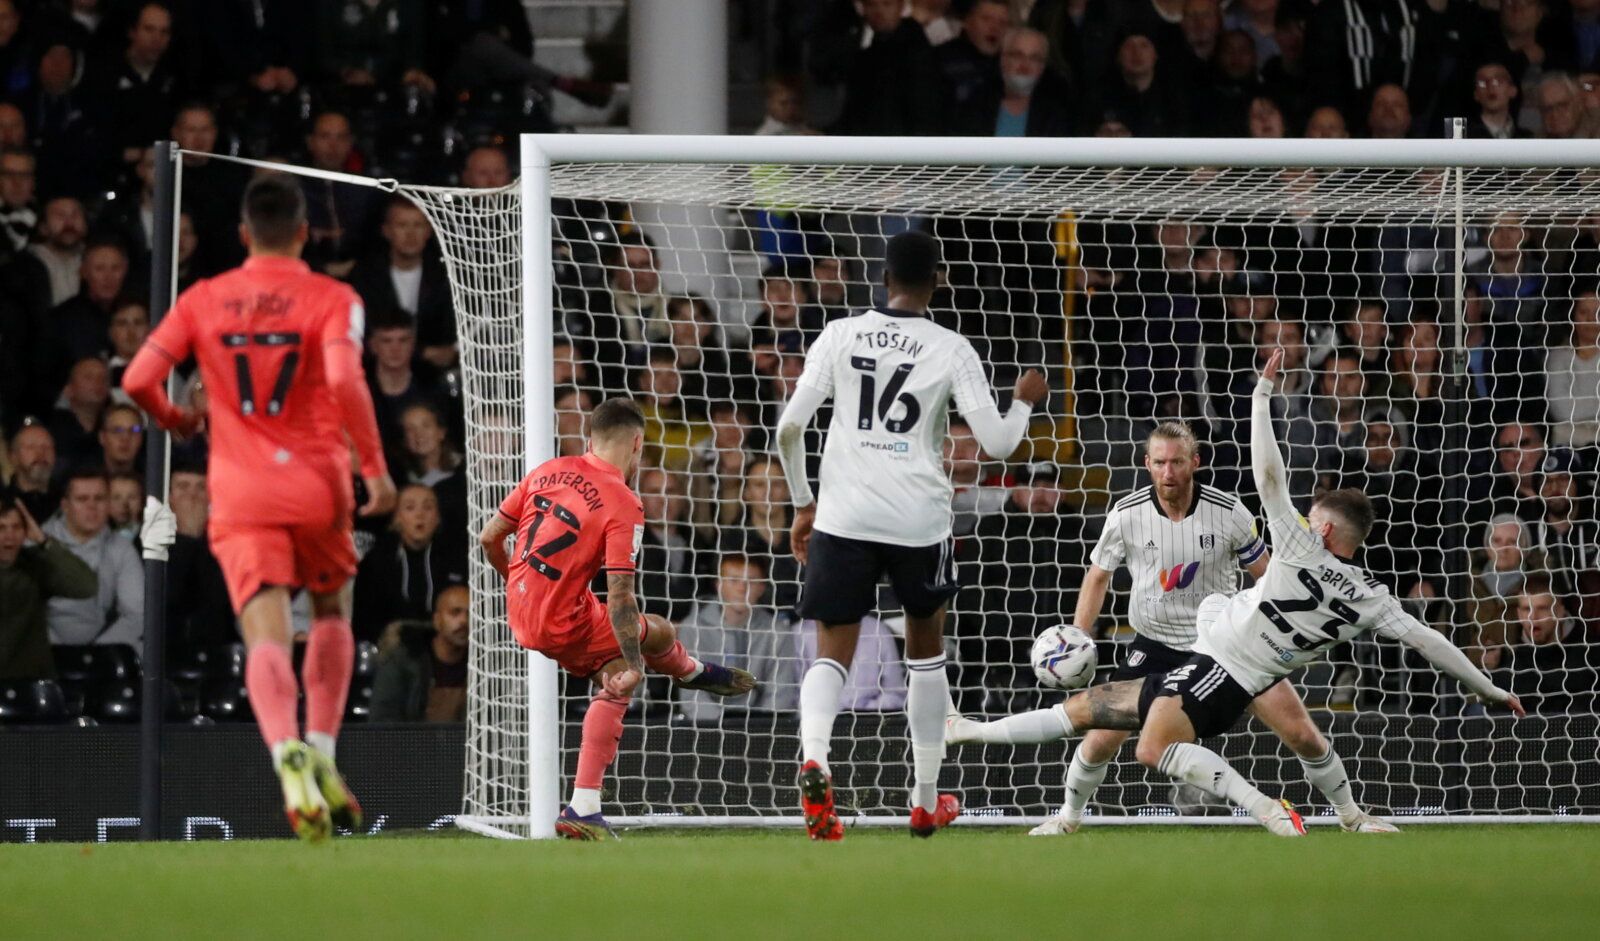 Soccer Football - Championship - Fulham v Swansea City - Craven Cottage, London, Britain - September 29, 2021  Swansea's Jamie Paterson scores their first goal  Action Images/Matthew Childs  EDITORIAL USE ONLY. No use with unauthorized audio, video, data, fixture lists, club/league logos or 